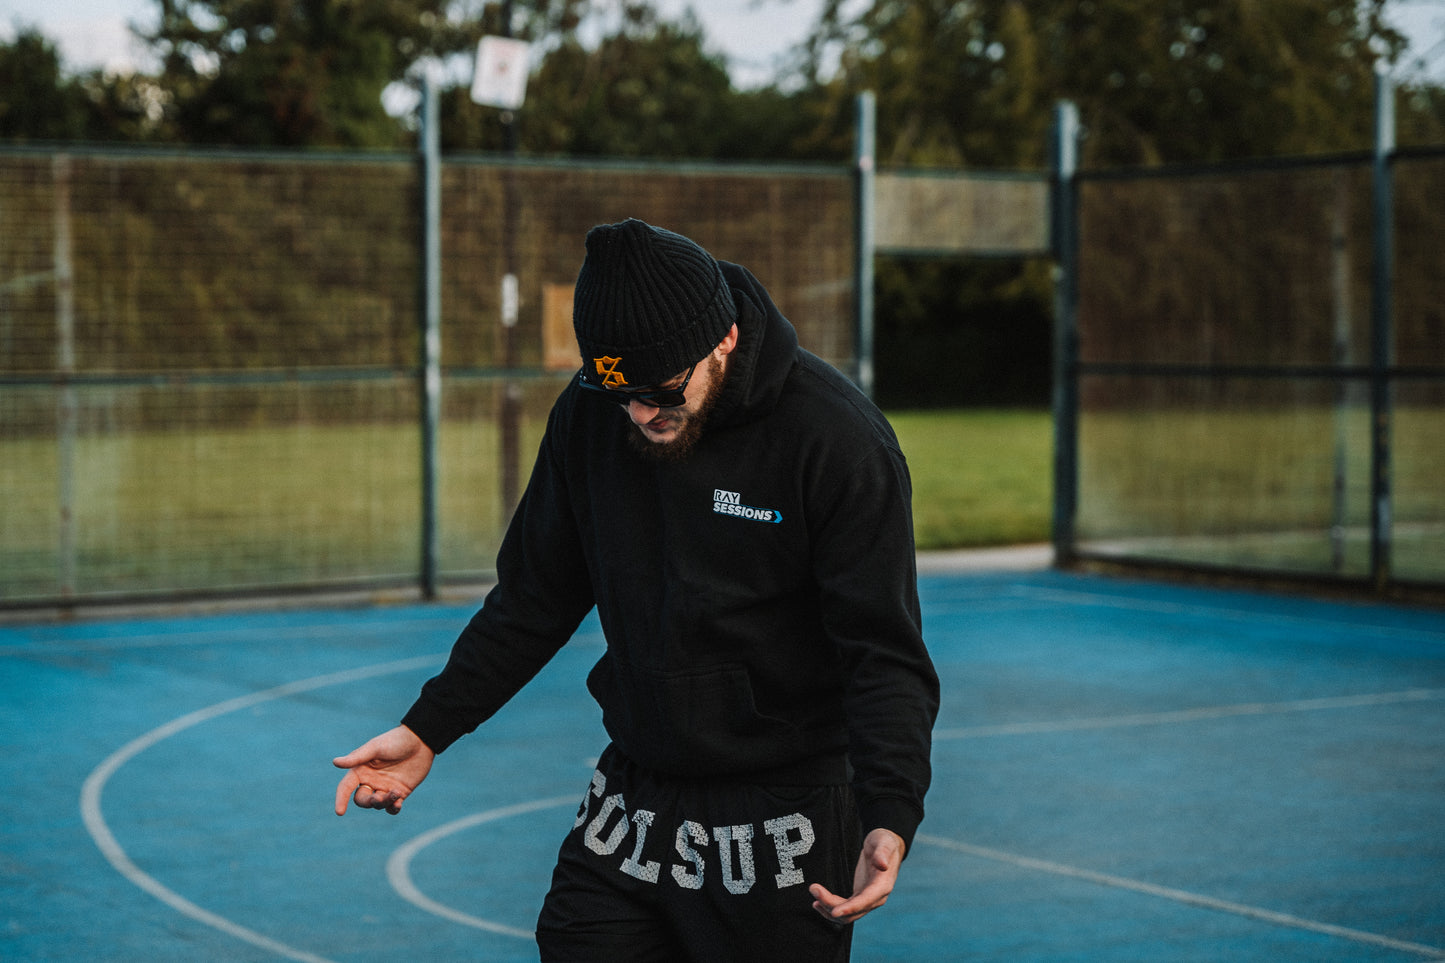 Ray Sessions Black Hoody